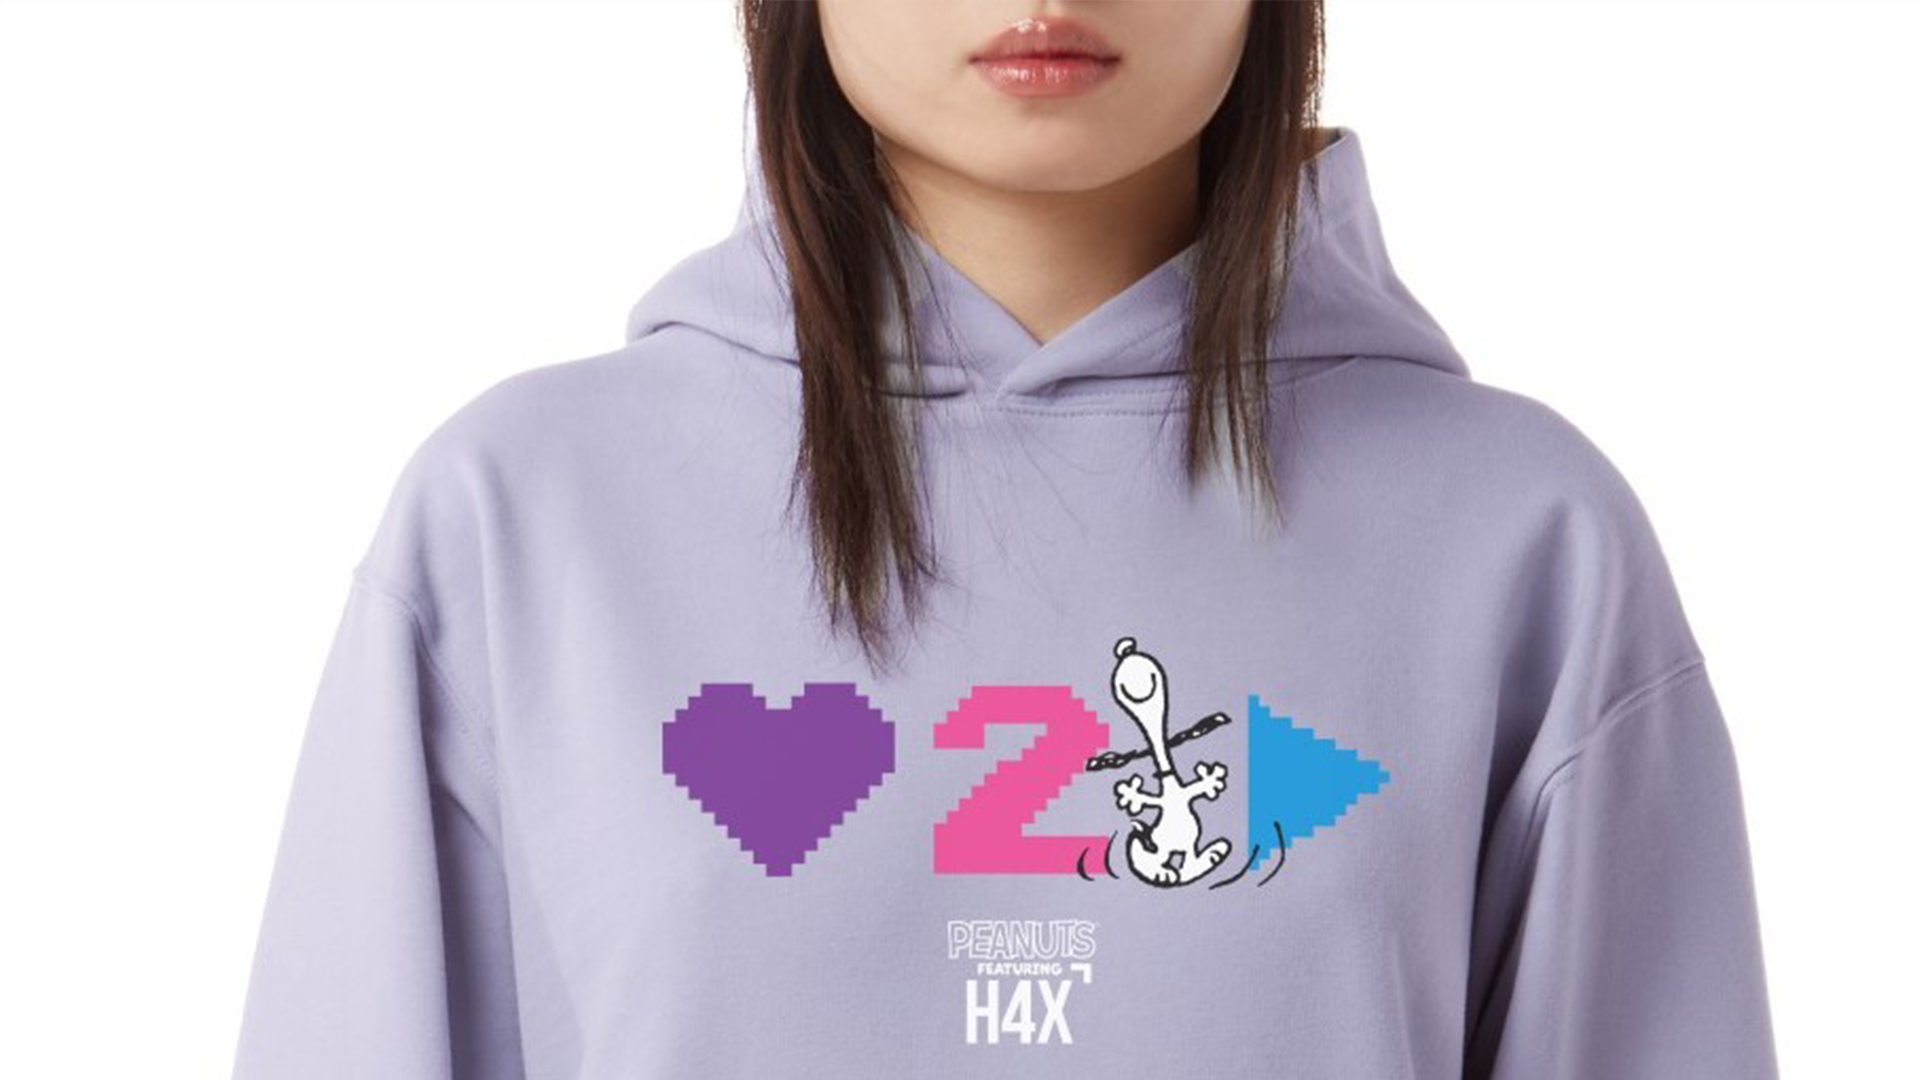 H4X PARTNERS WITH REXZILLA ON ZILLA GANG APPAREL COLLECTION